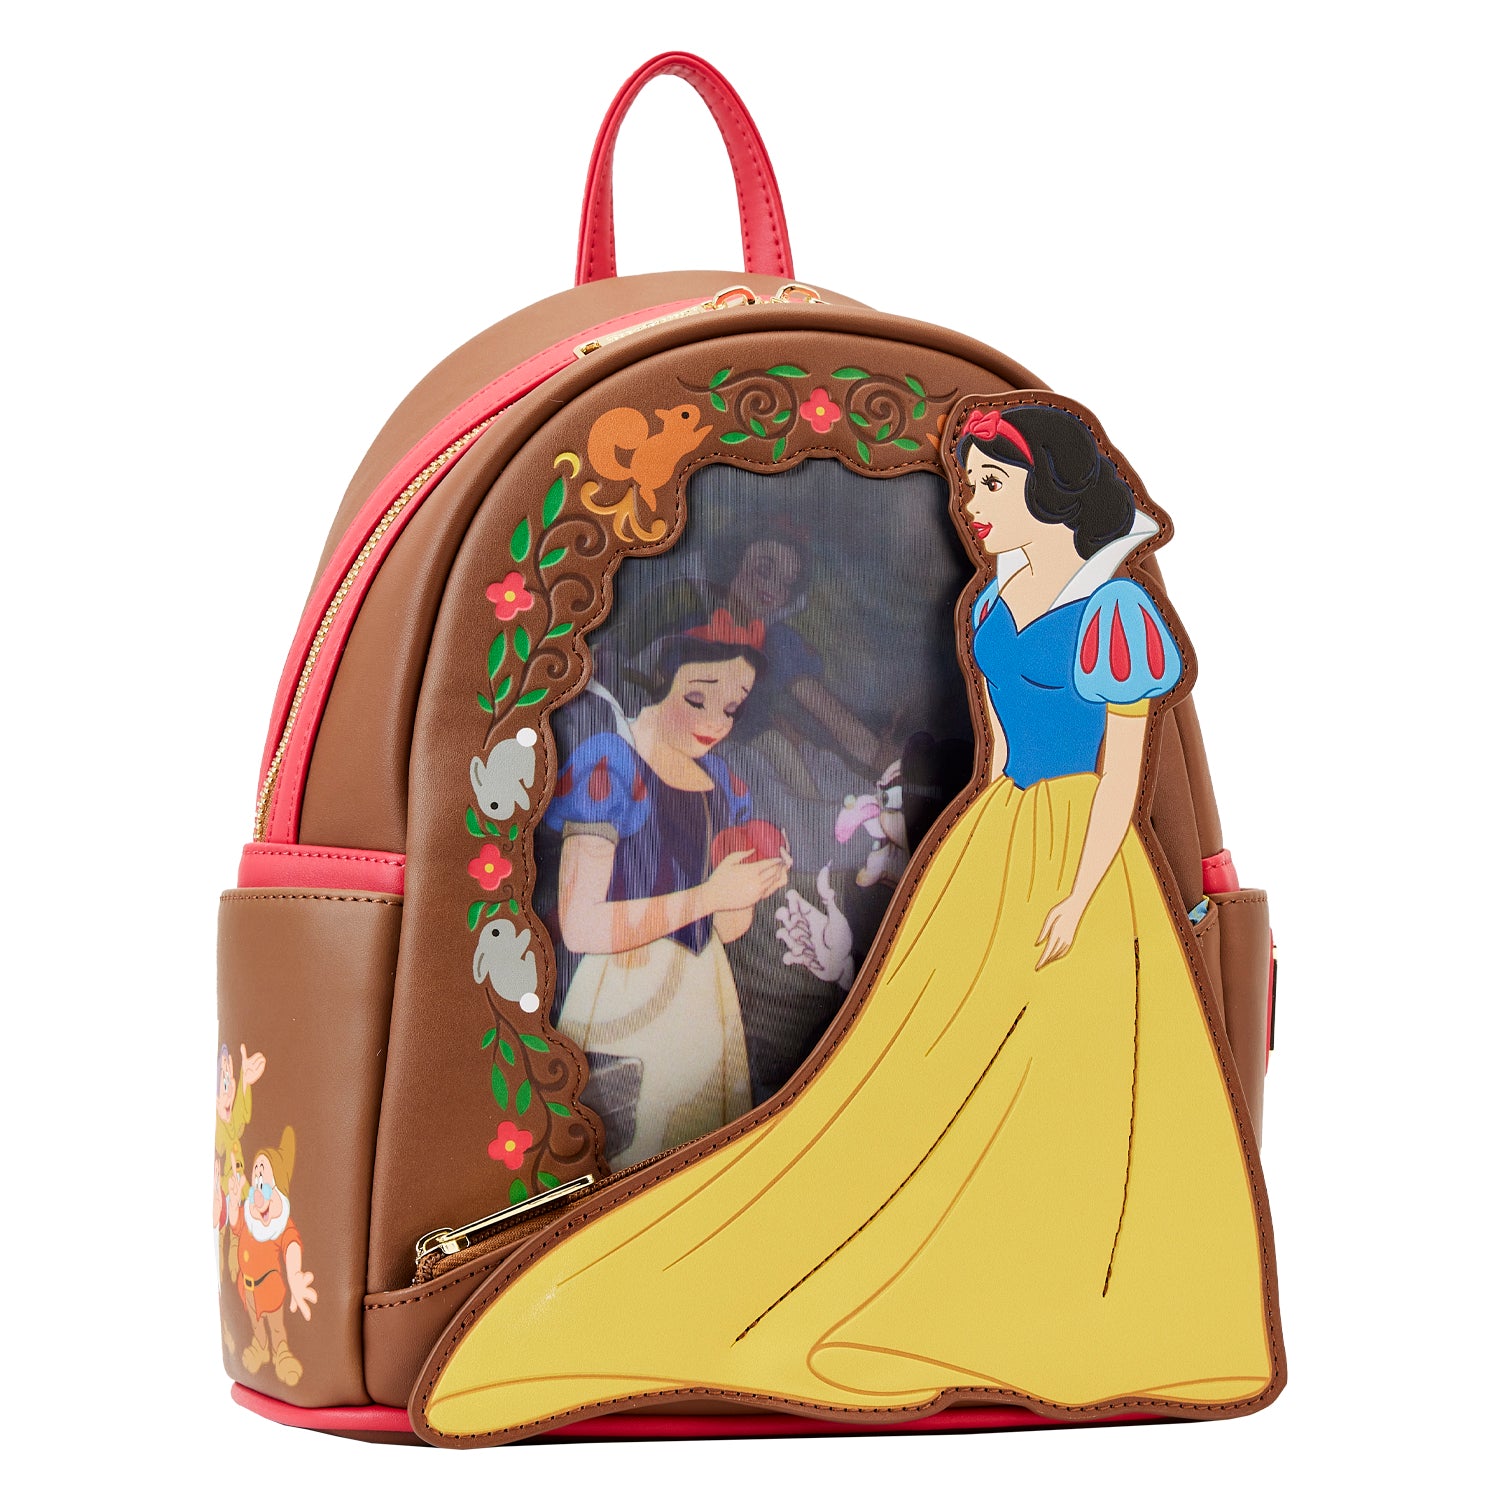 snow white loungefly